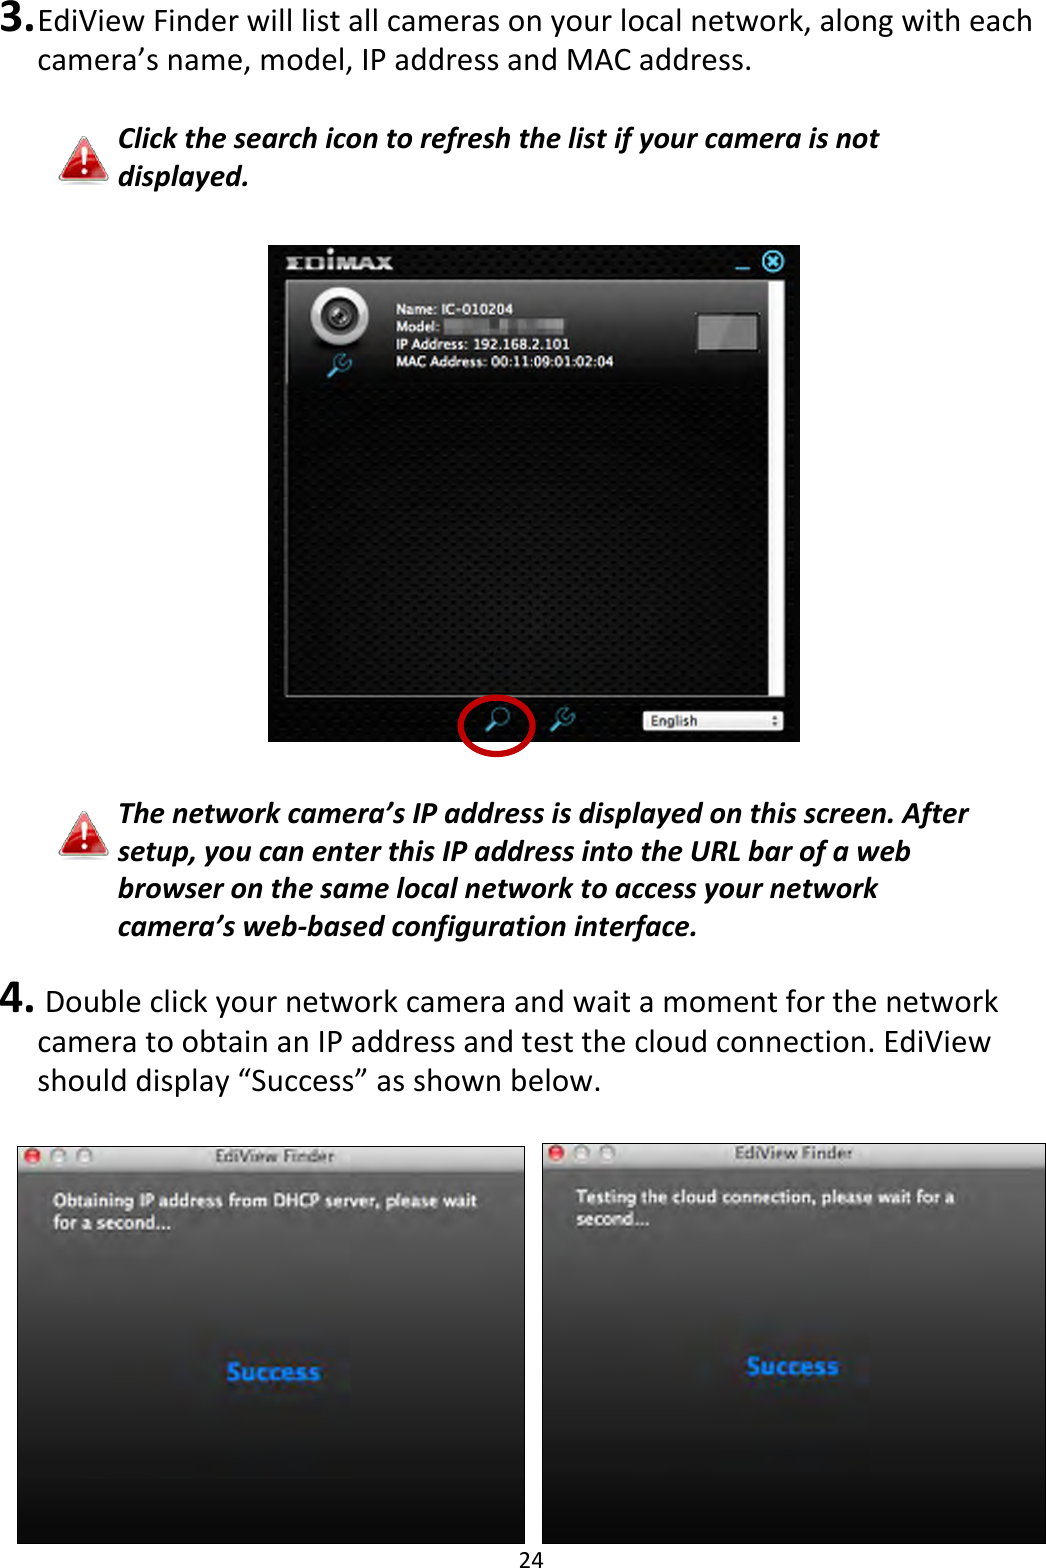 24  3. EdiView Finder will list all cameras on your local network, along with each camera’s name, model, IP address and MAC address.  Click the search icon to refresh the list if your camera is not displayed.      The network camera’s IP address is displayed on this screen. After setup, you can enter this IP address into the URL bar of a web browser on the same local network to access your network camera’s web-based configuration interface.  4.  Double click your network camera and wait a moment for the network camera to obtain an IP address and test the cloud connection. EdiView should display “Success” as shown below.     